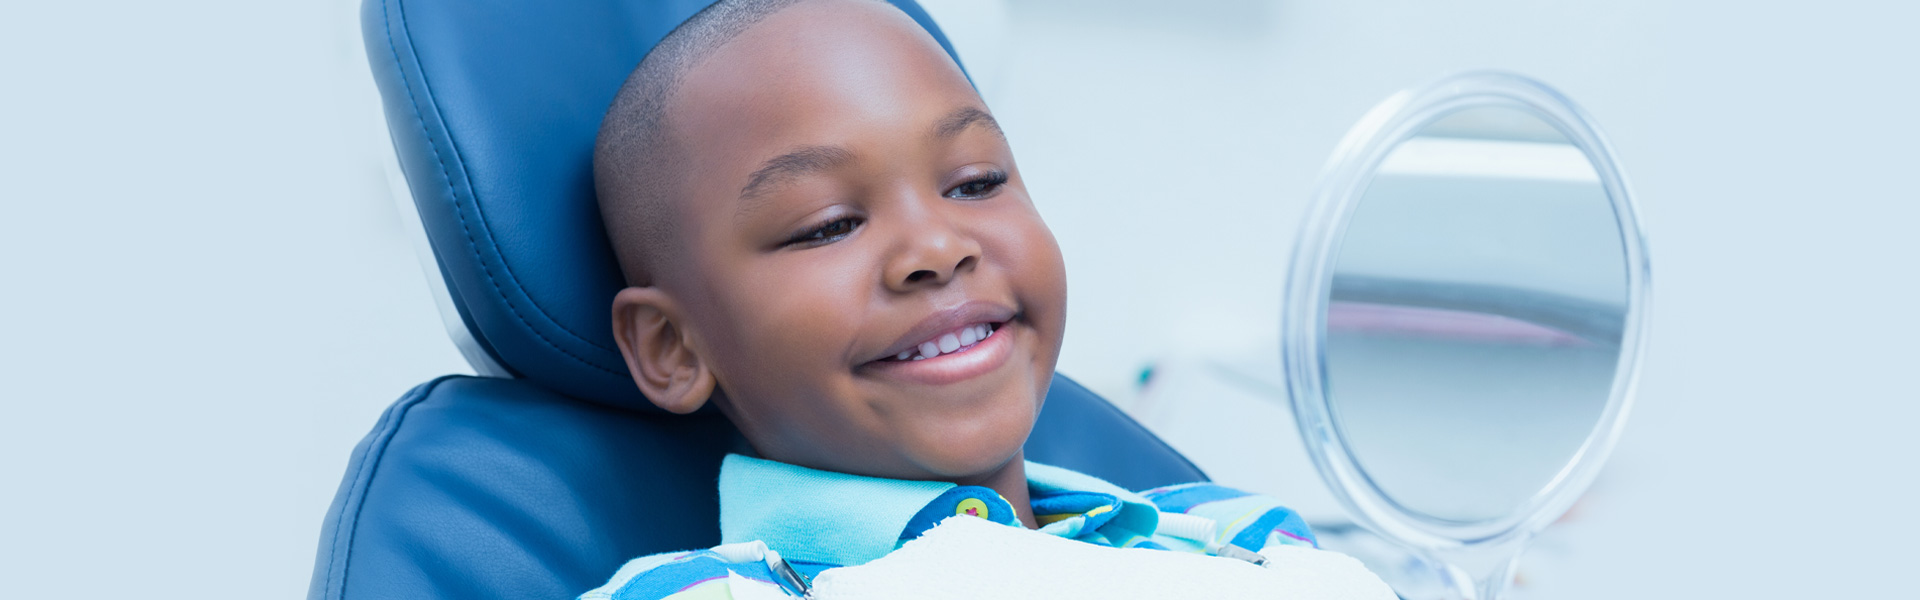 Amazing Facts About Children’s Oral Health and Pediatric Dentistry